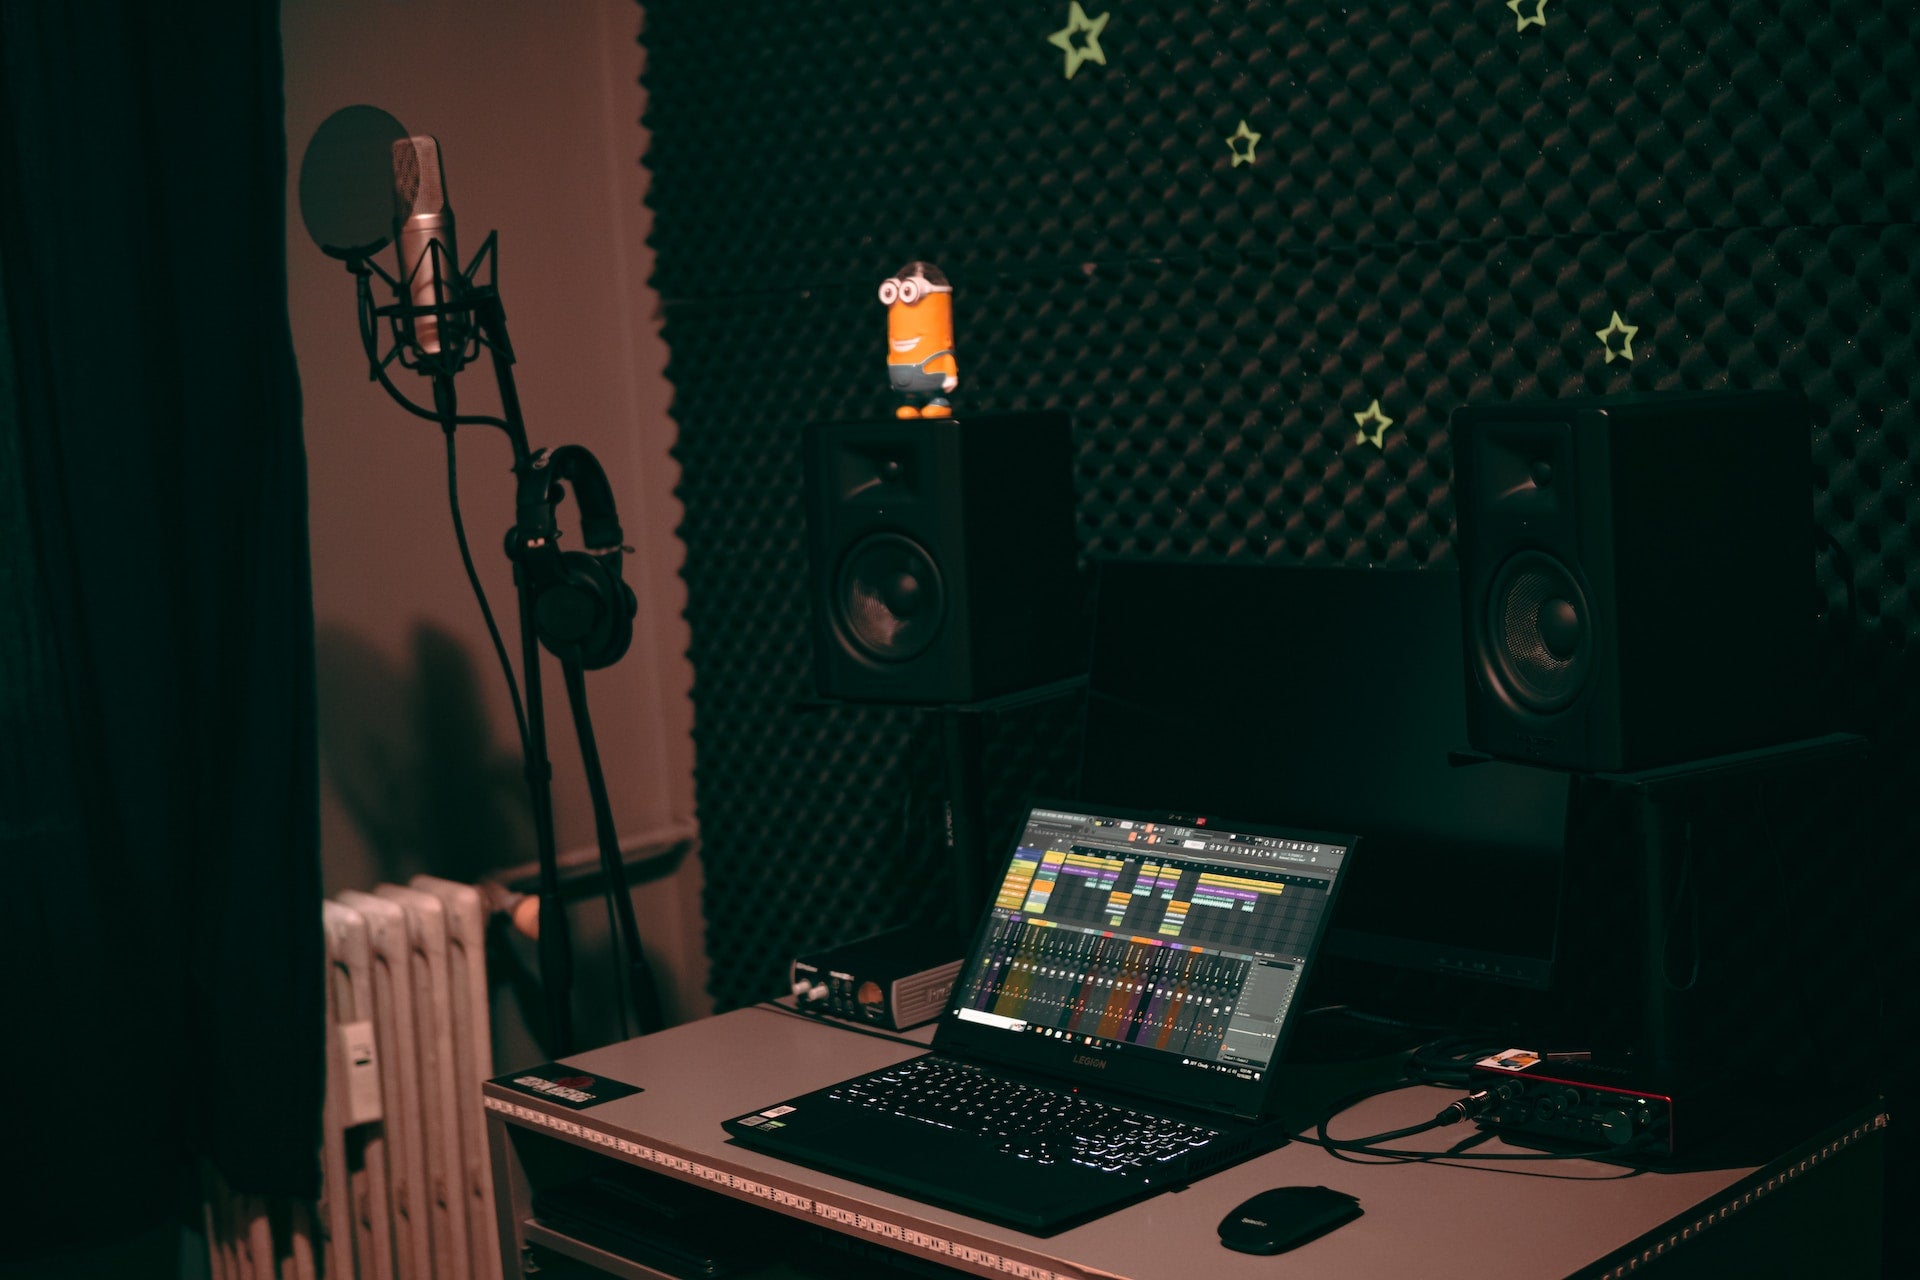 FL studio on a laptop in a small home studio room